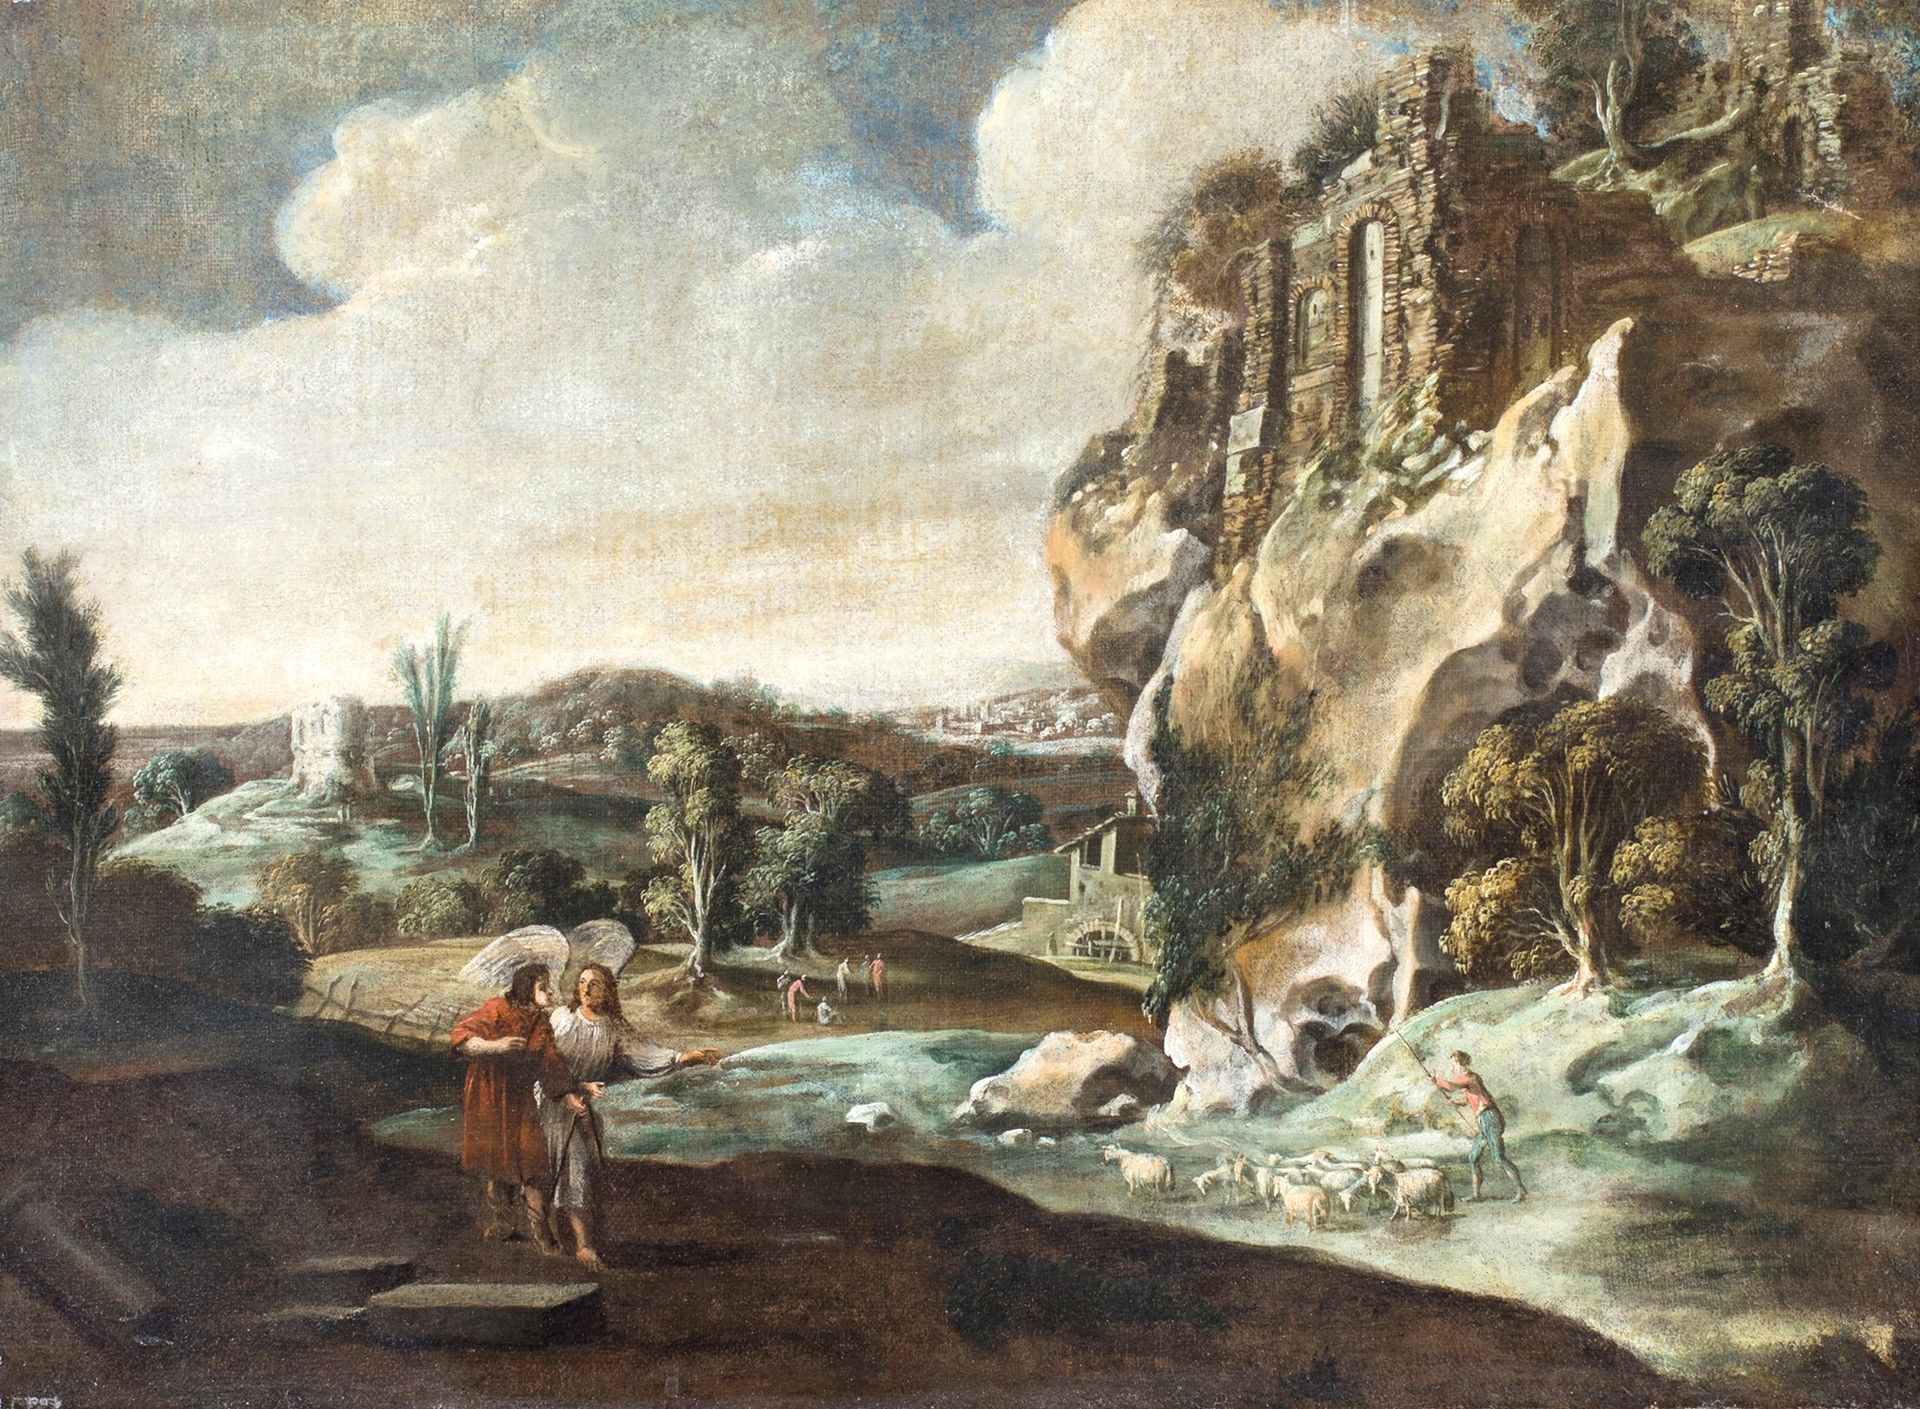 Pittore del XVIII secolo Tobias and the Angel 画布上的油画